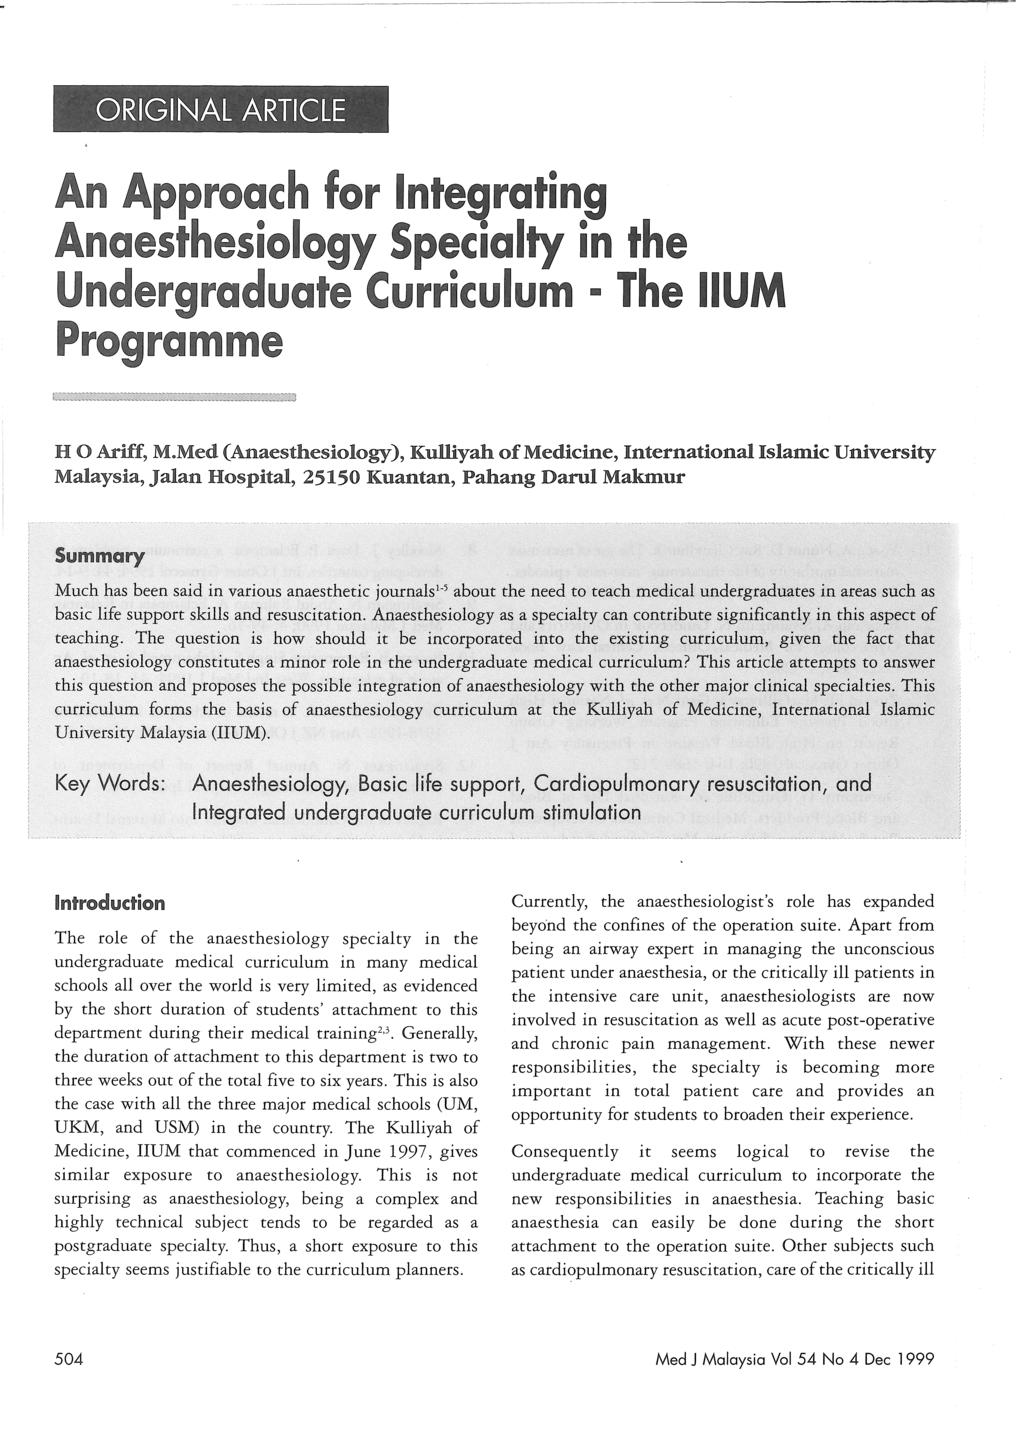 ORIGINAL ARTICLE An Approach for Inte~rating Anaesthesiology Specialty in the Undergraduate Curriculum - The IIUM Programme H 0 Ariff, M.